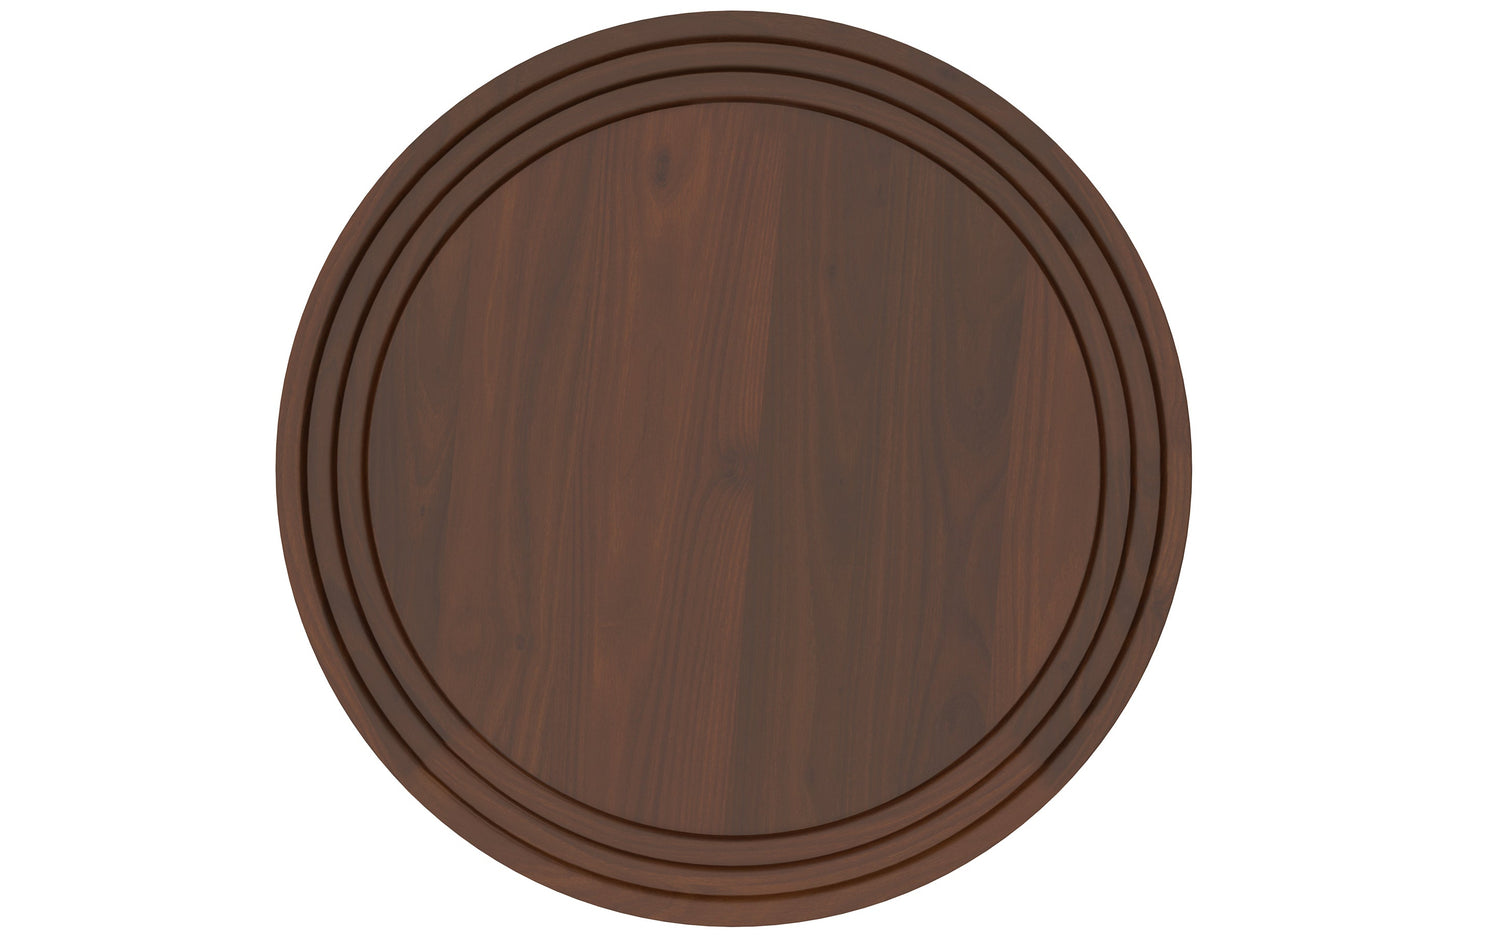 Clairmont Round Side Table